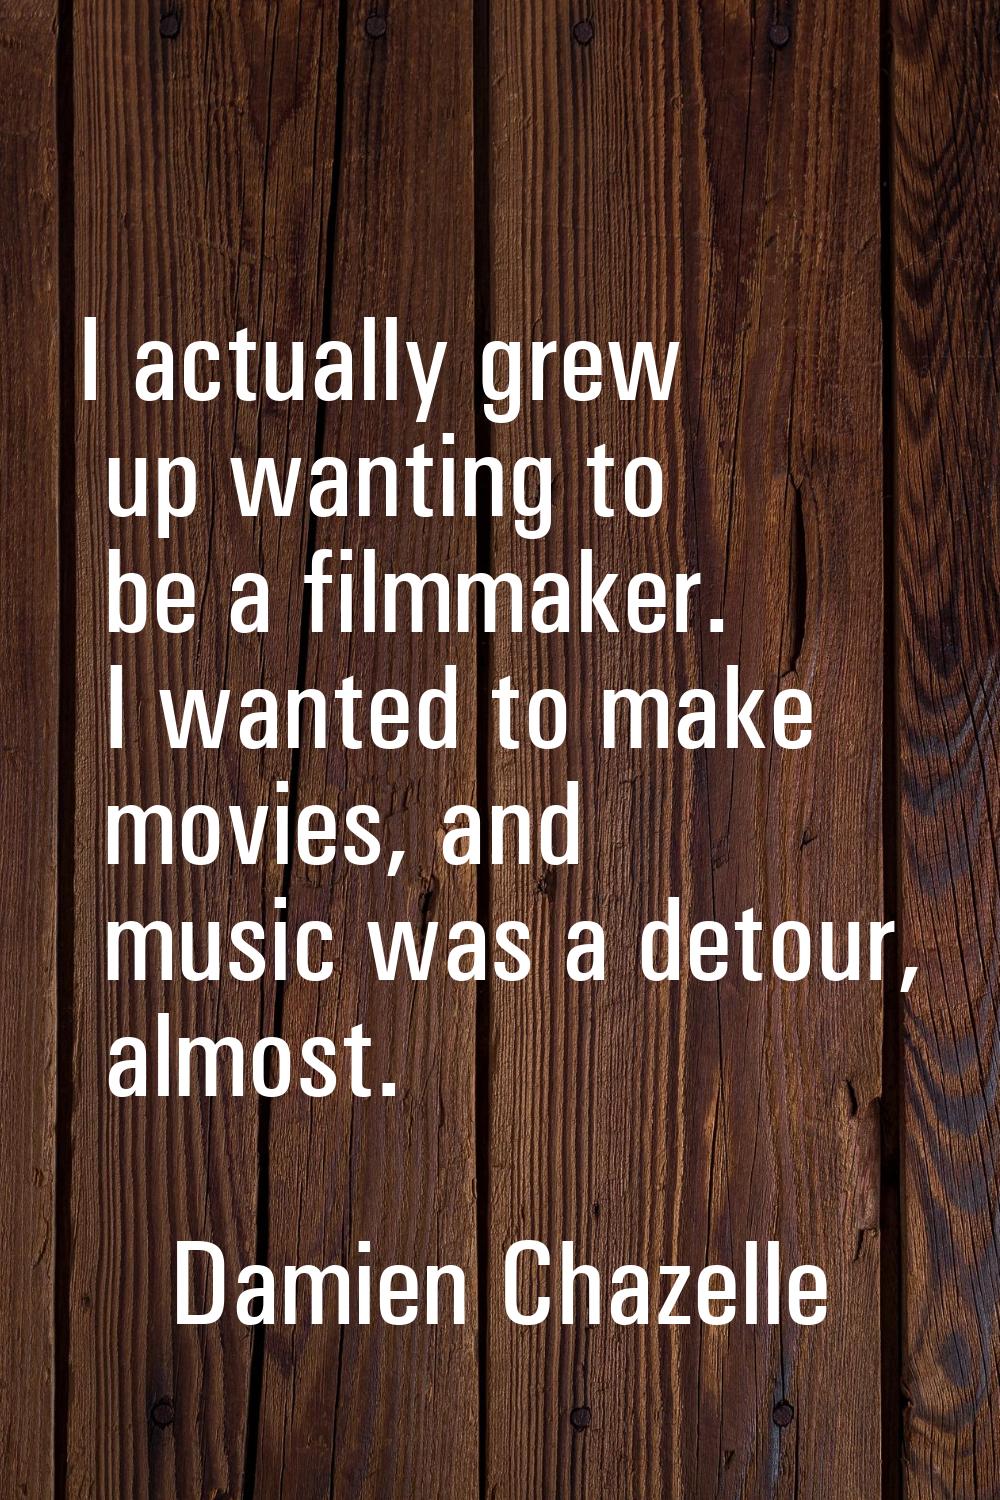 I actually grew up wanting to be a filmmaker. I wanted to make movies, and music was a detour, almo